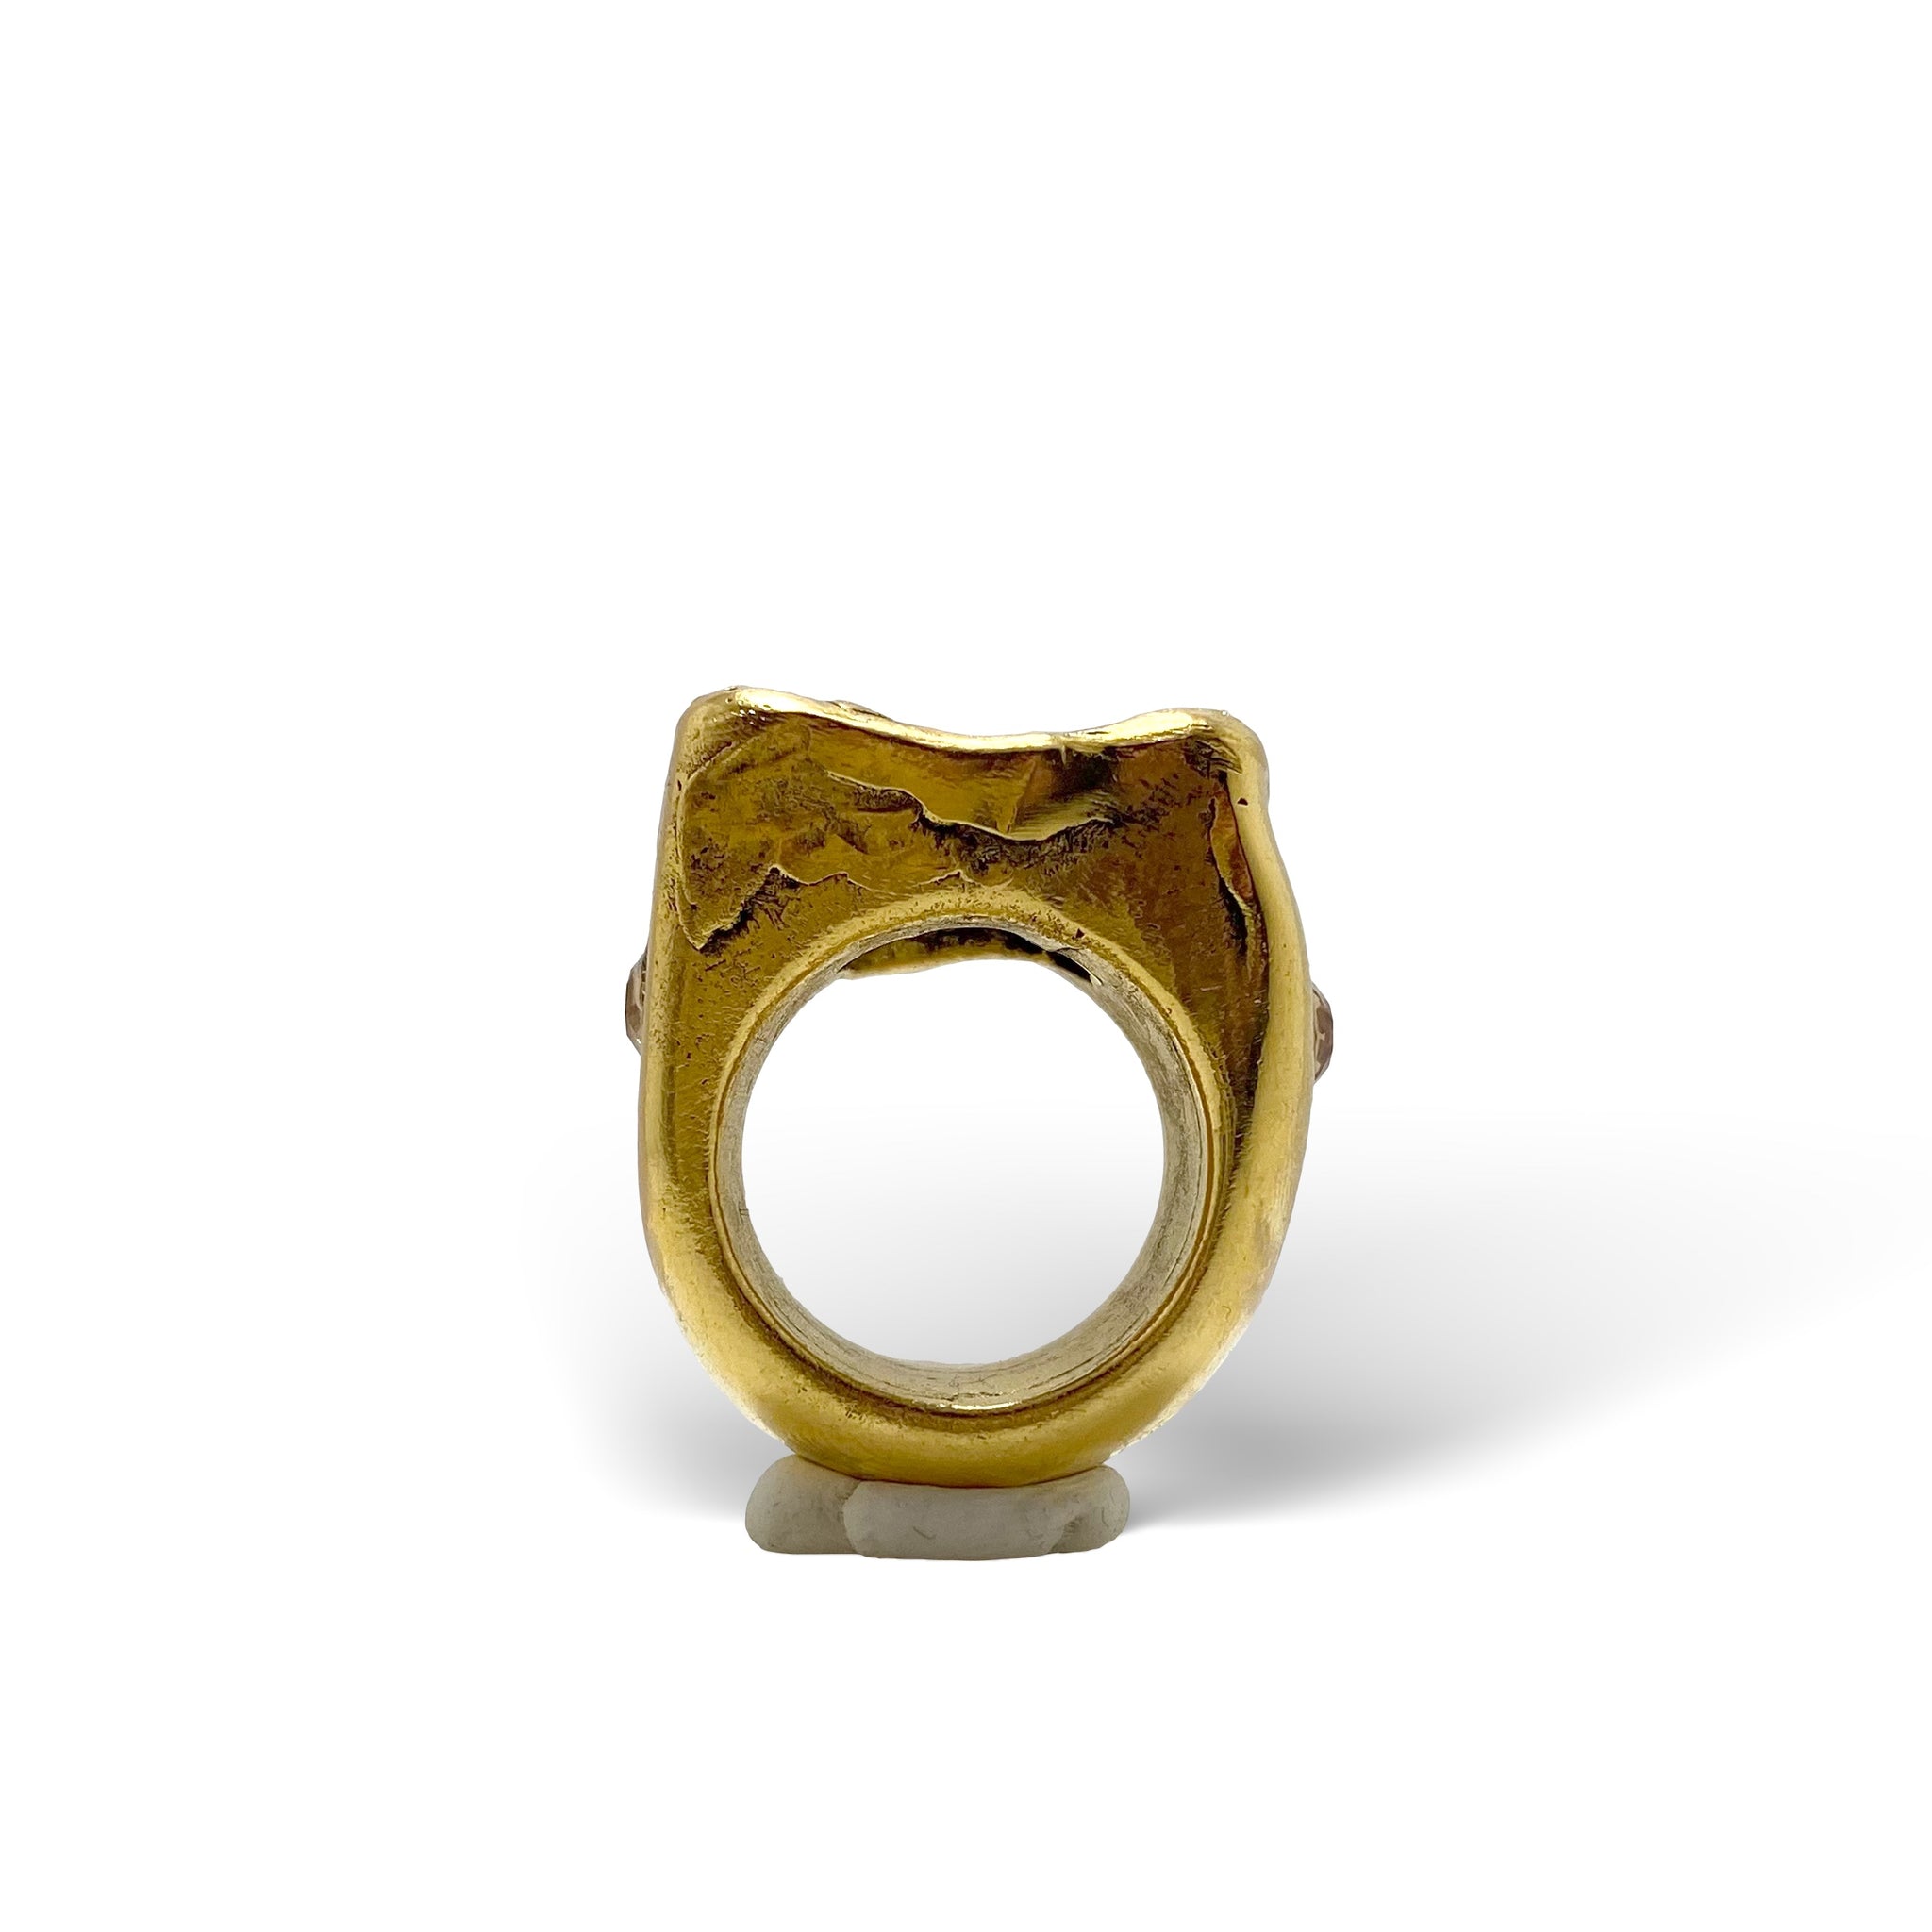 HANDCRAFTED GOLD PLATED RING